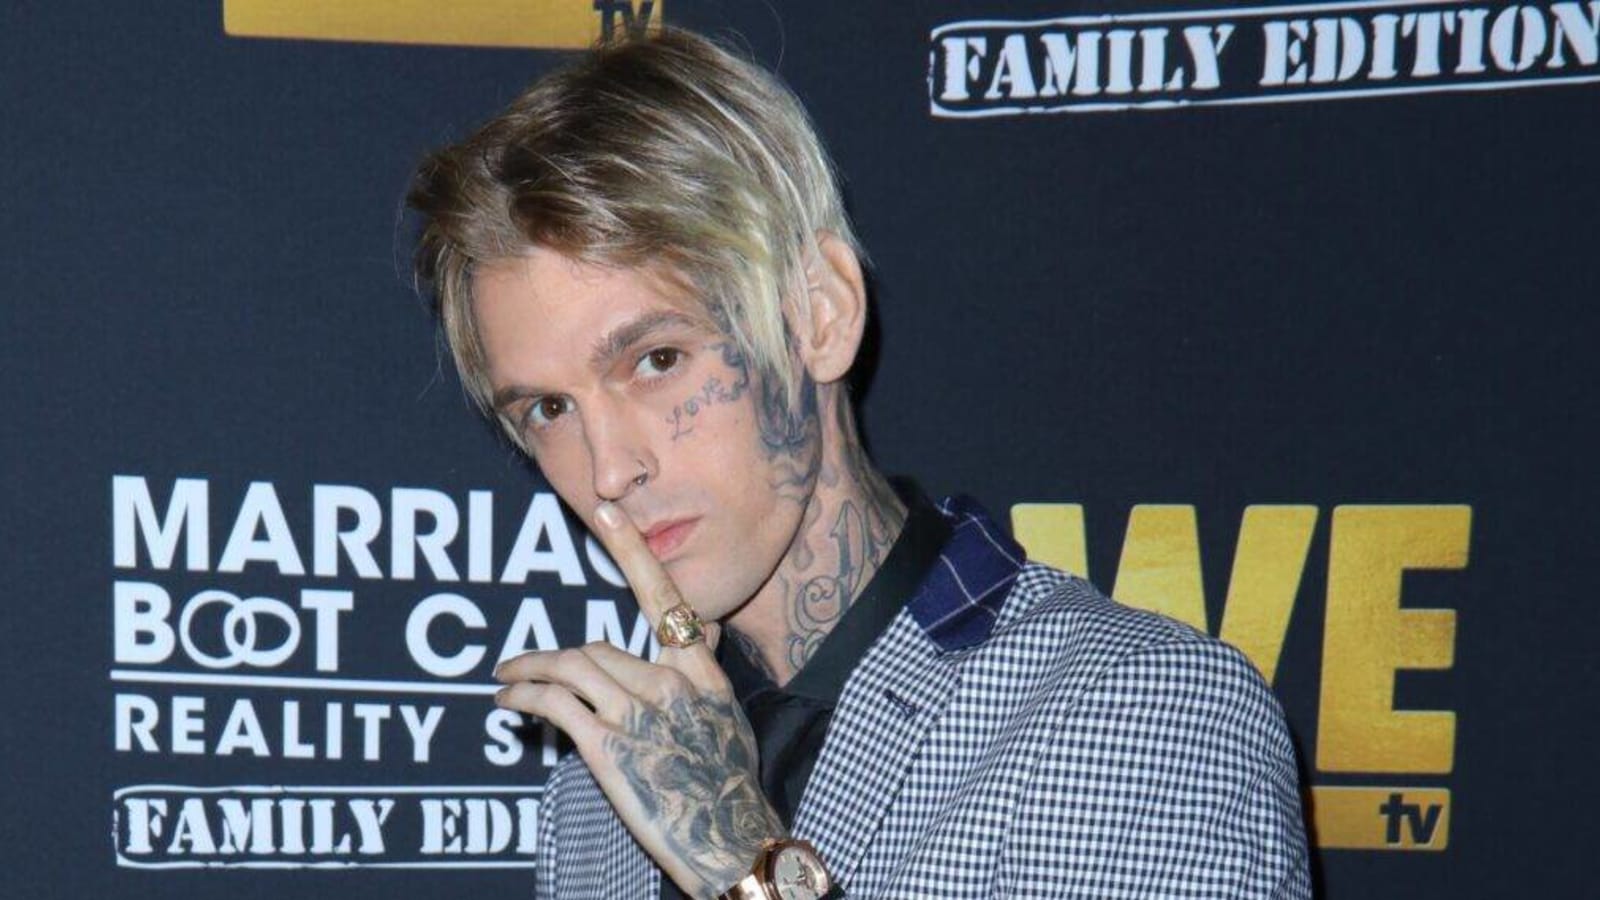 Aaron Carter's cause of death revealed